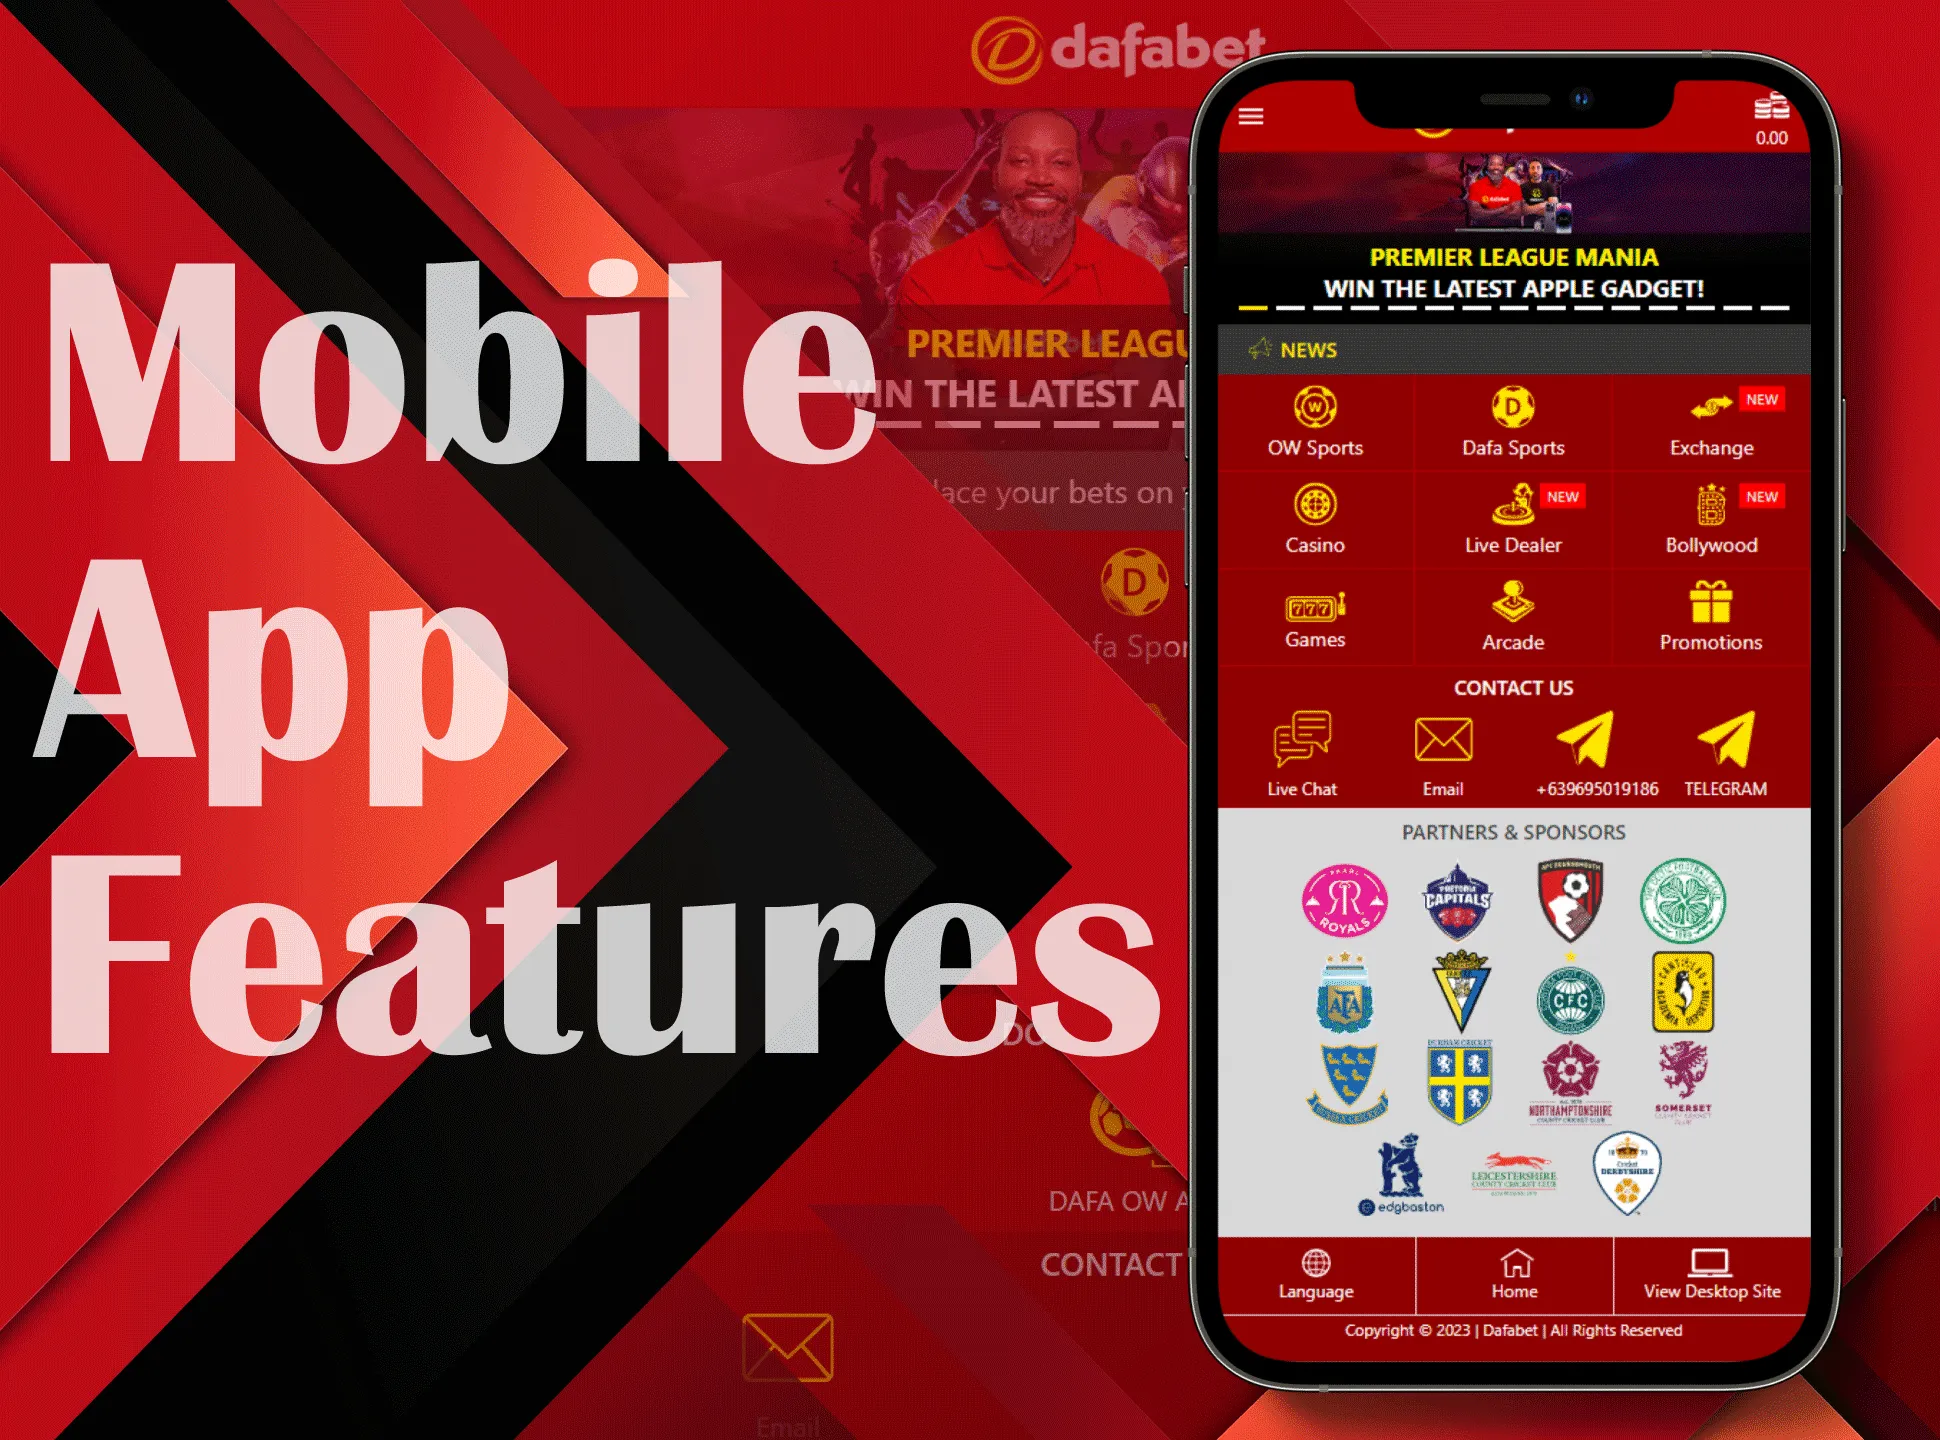 Get to know which features Dafabet offers.